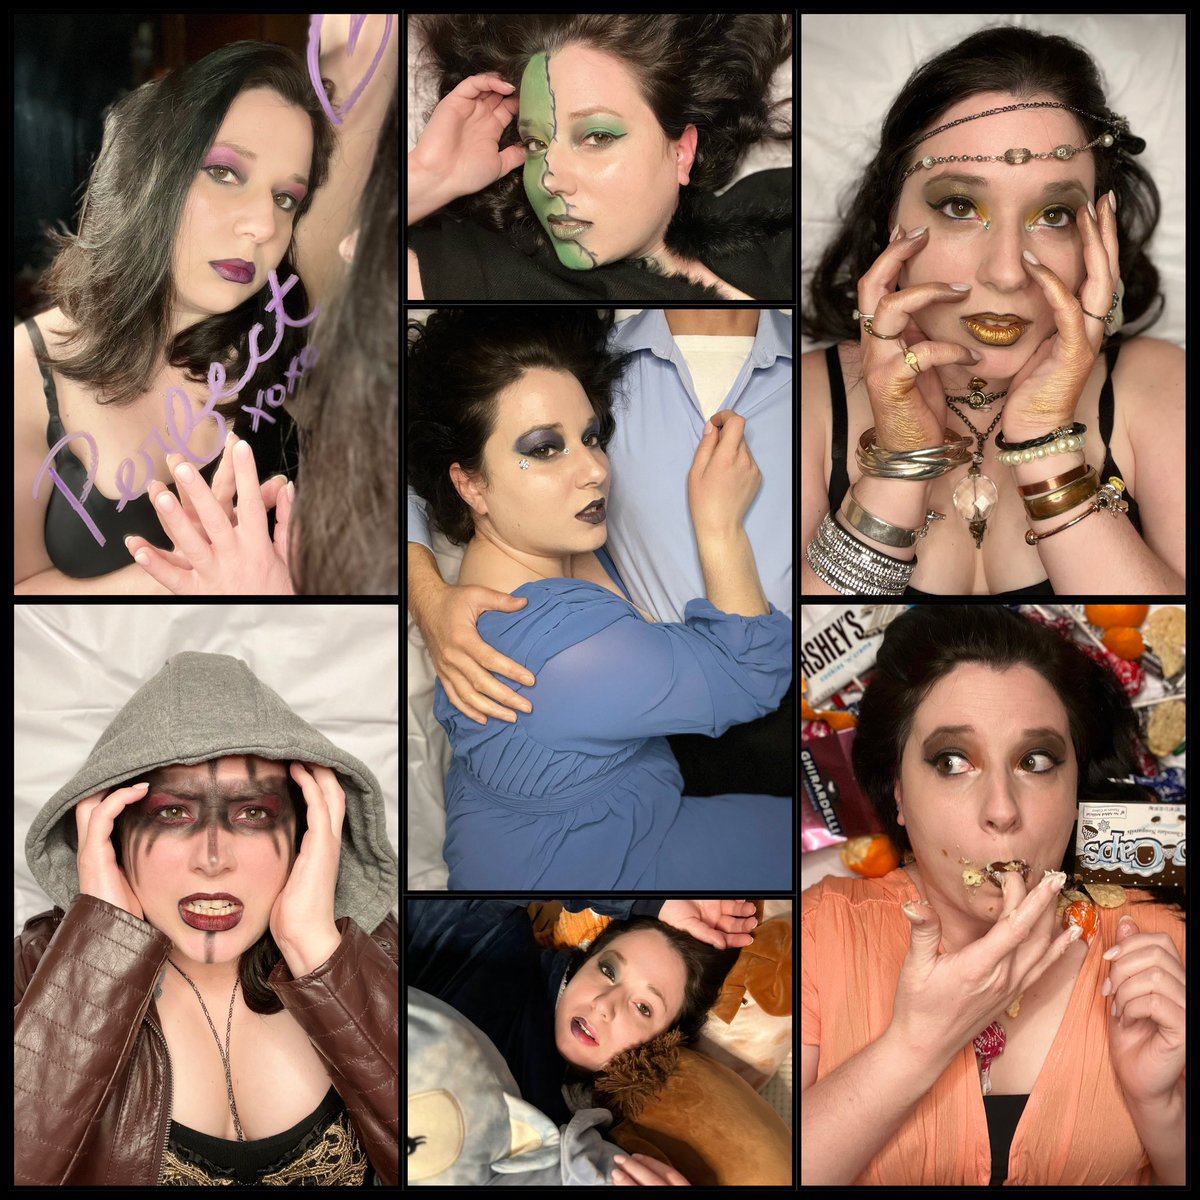 Week 2 complete of taking a photo a day for the next year. This week theme was seven deadly sins. Got to say I love them all, what do you think? #photoaday2023 #SevenDeadlySins #photography #nyxcosmetics #revolutionbeauty